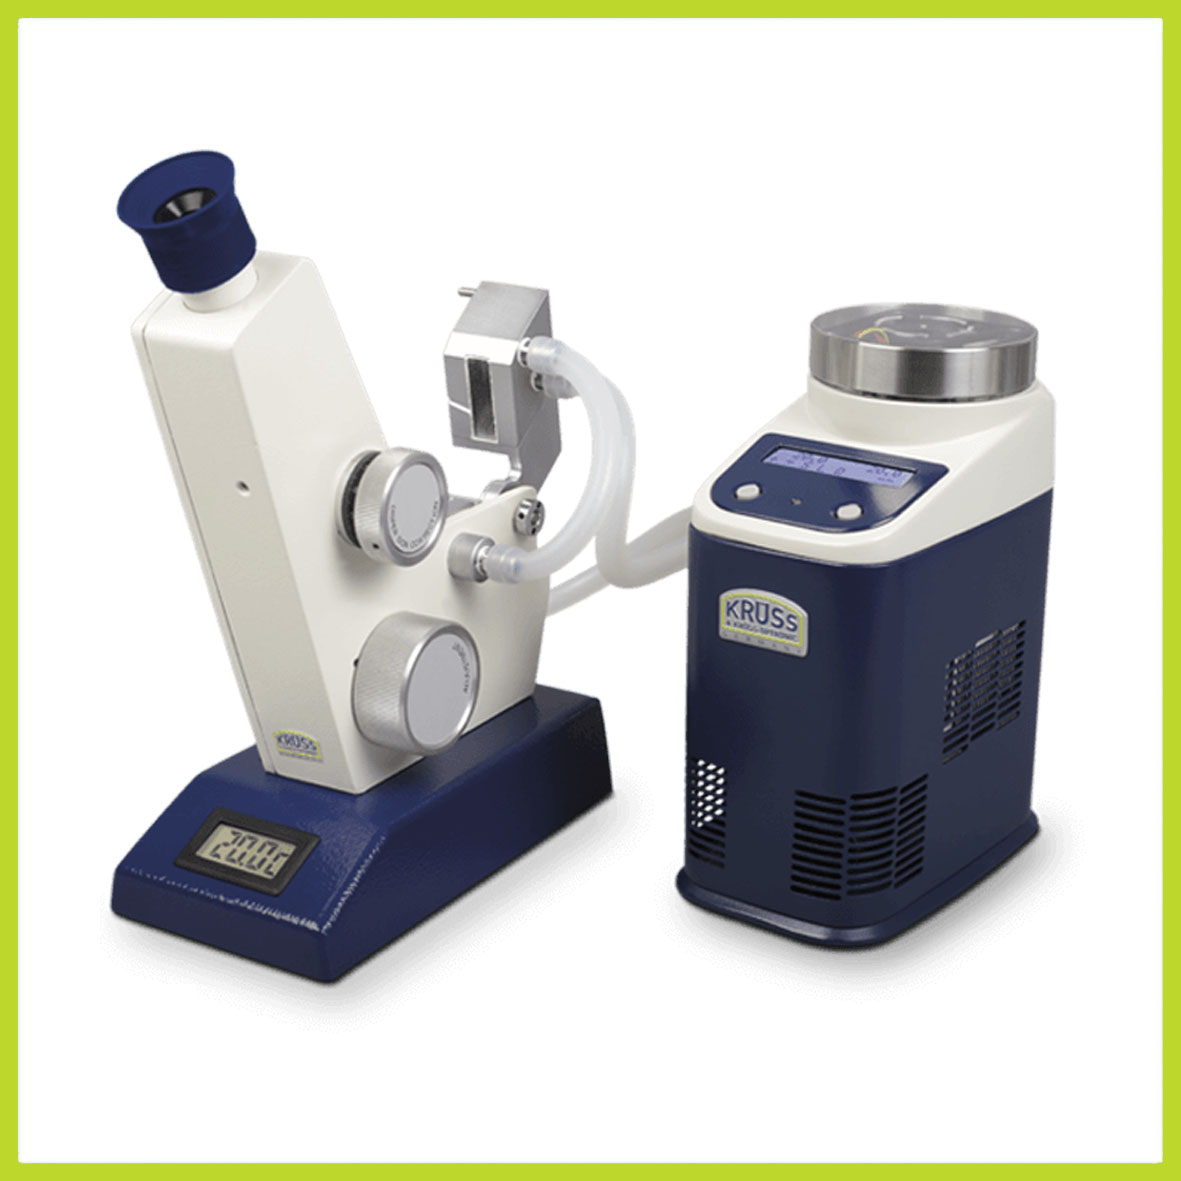  Abbe Refractometer 